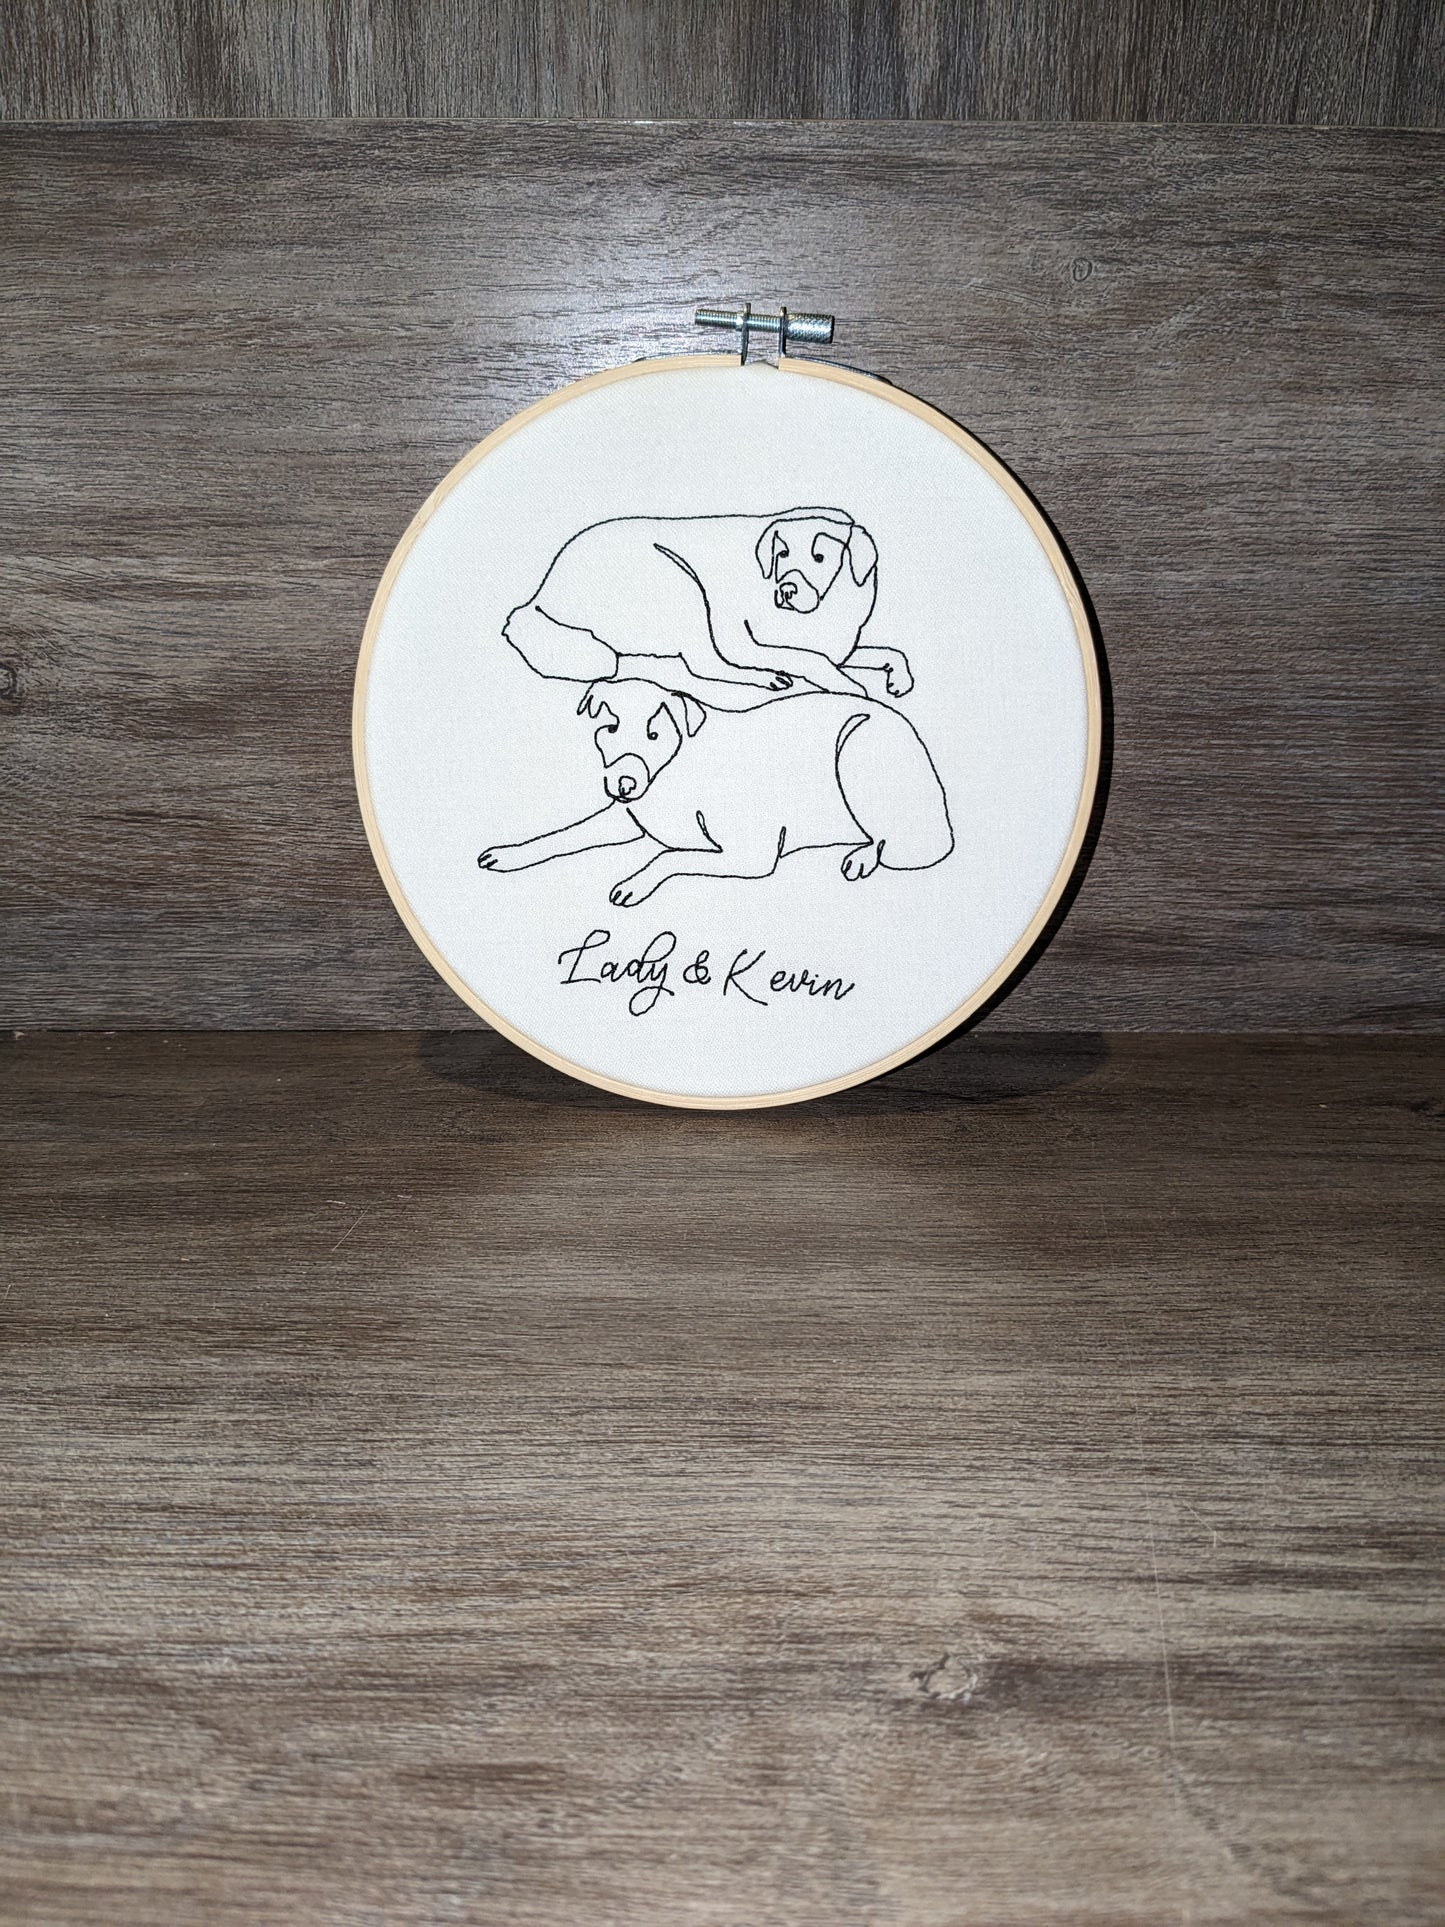 Dogs embroidered line art in embroidery frame